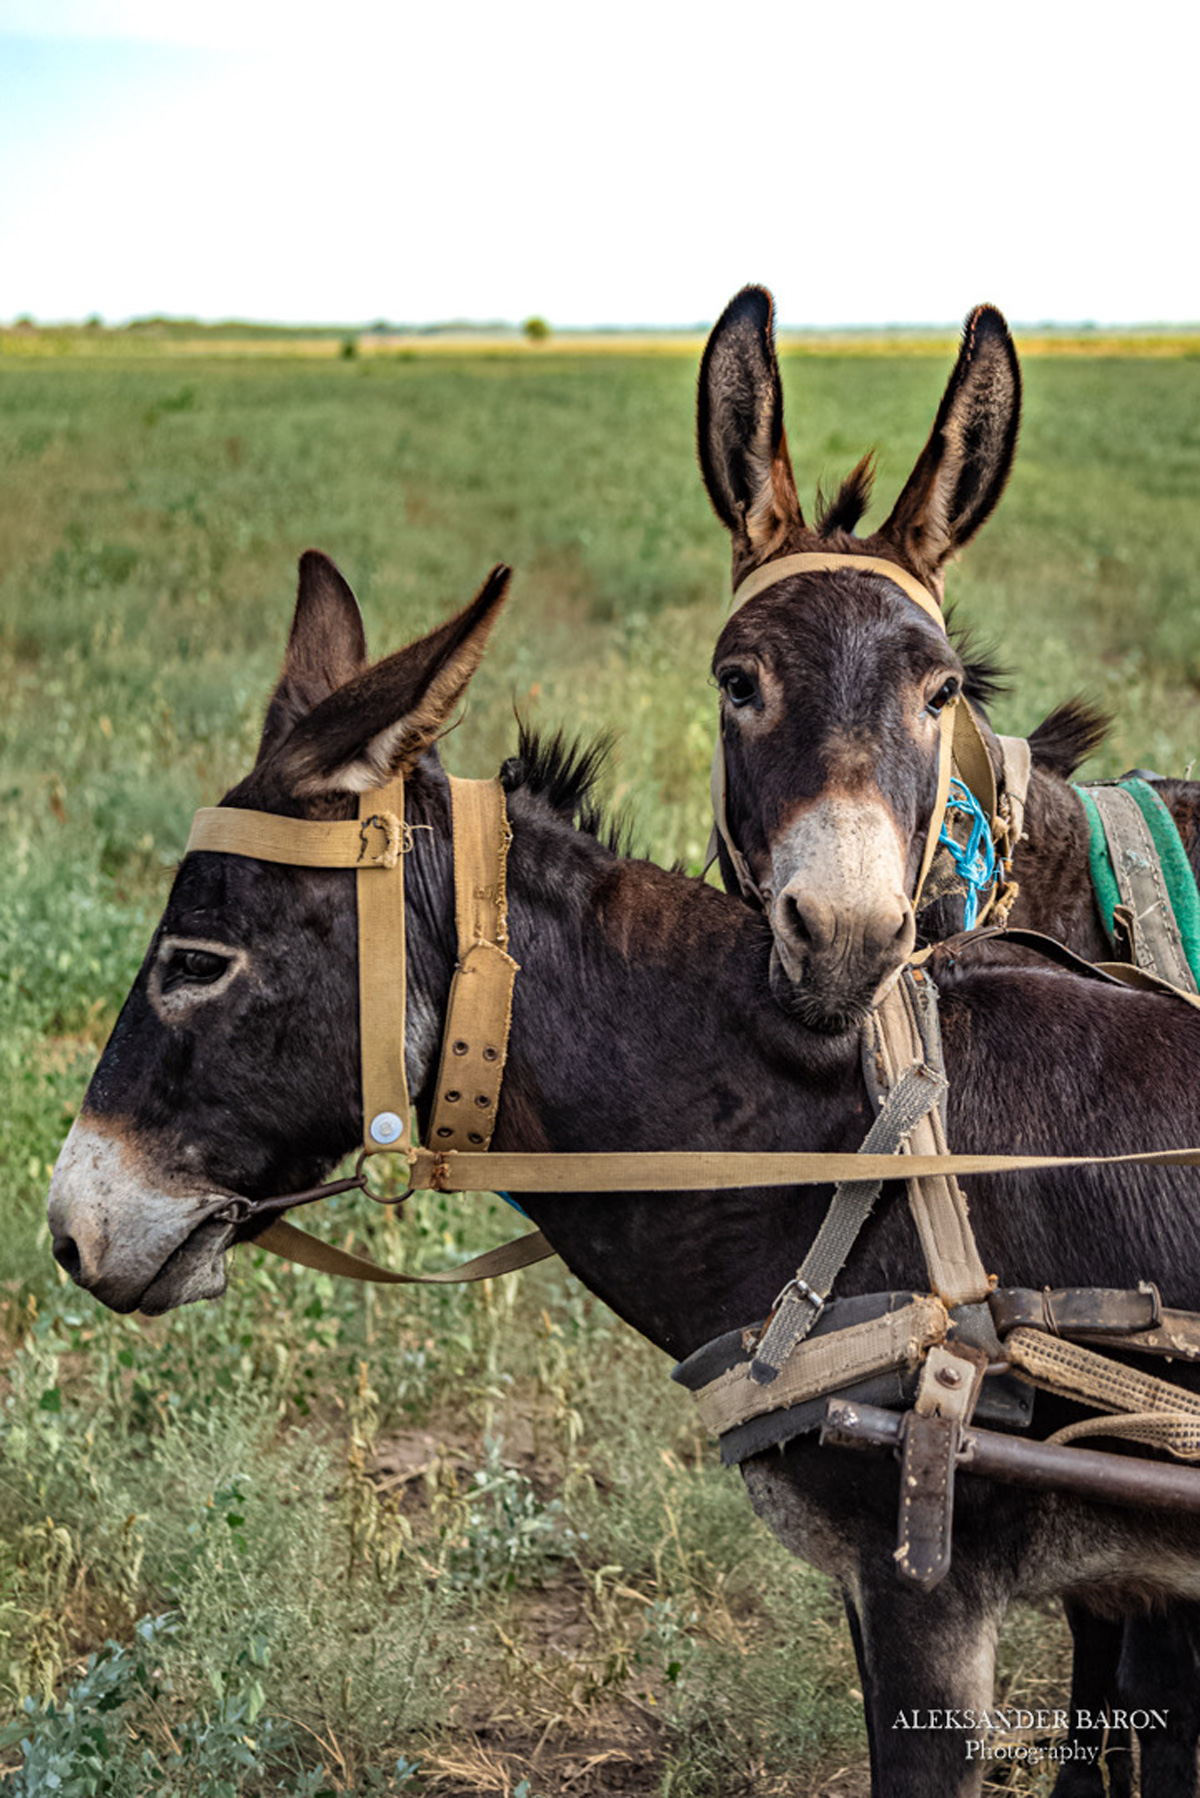 Picturesque Bessarabia - carts with donkeys